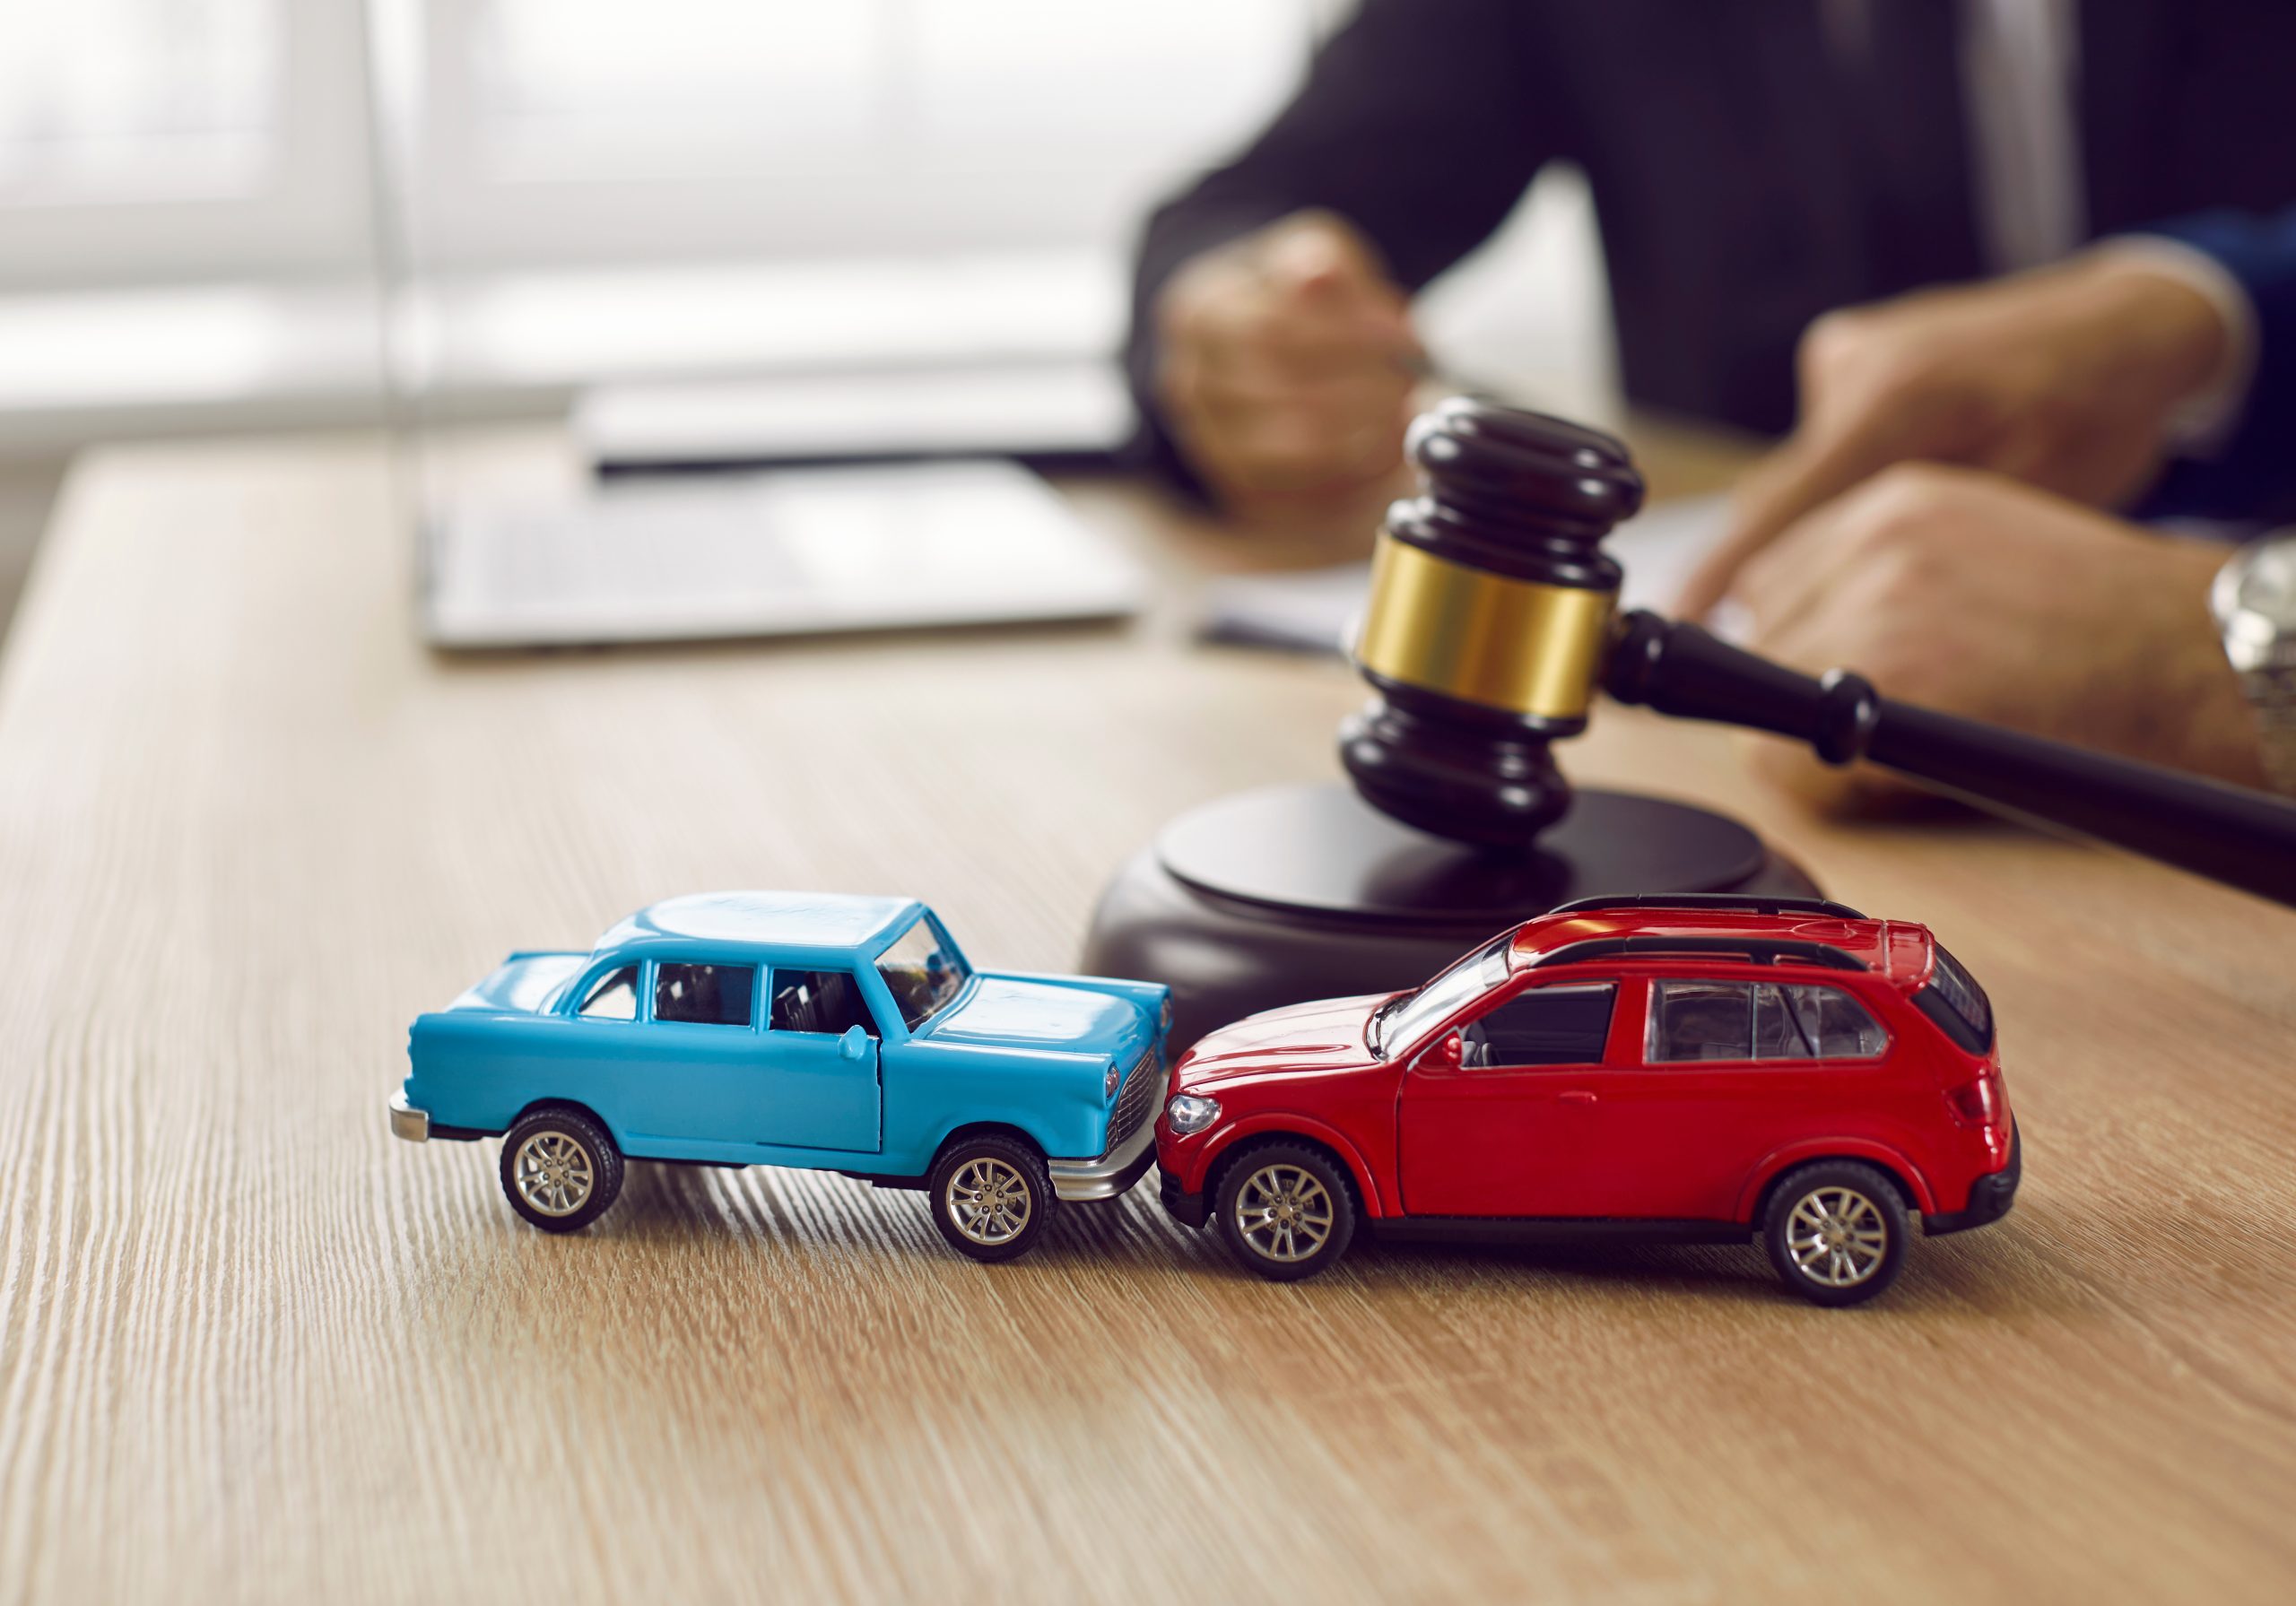 Two crashed toy automobiles on lawyer's table illustrating car insurance concept